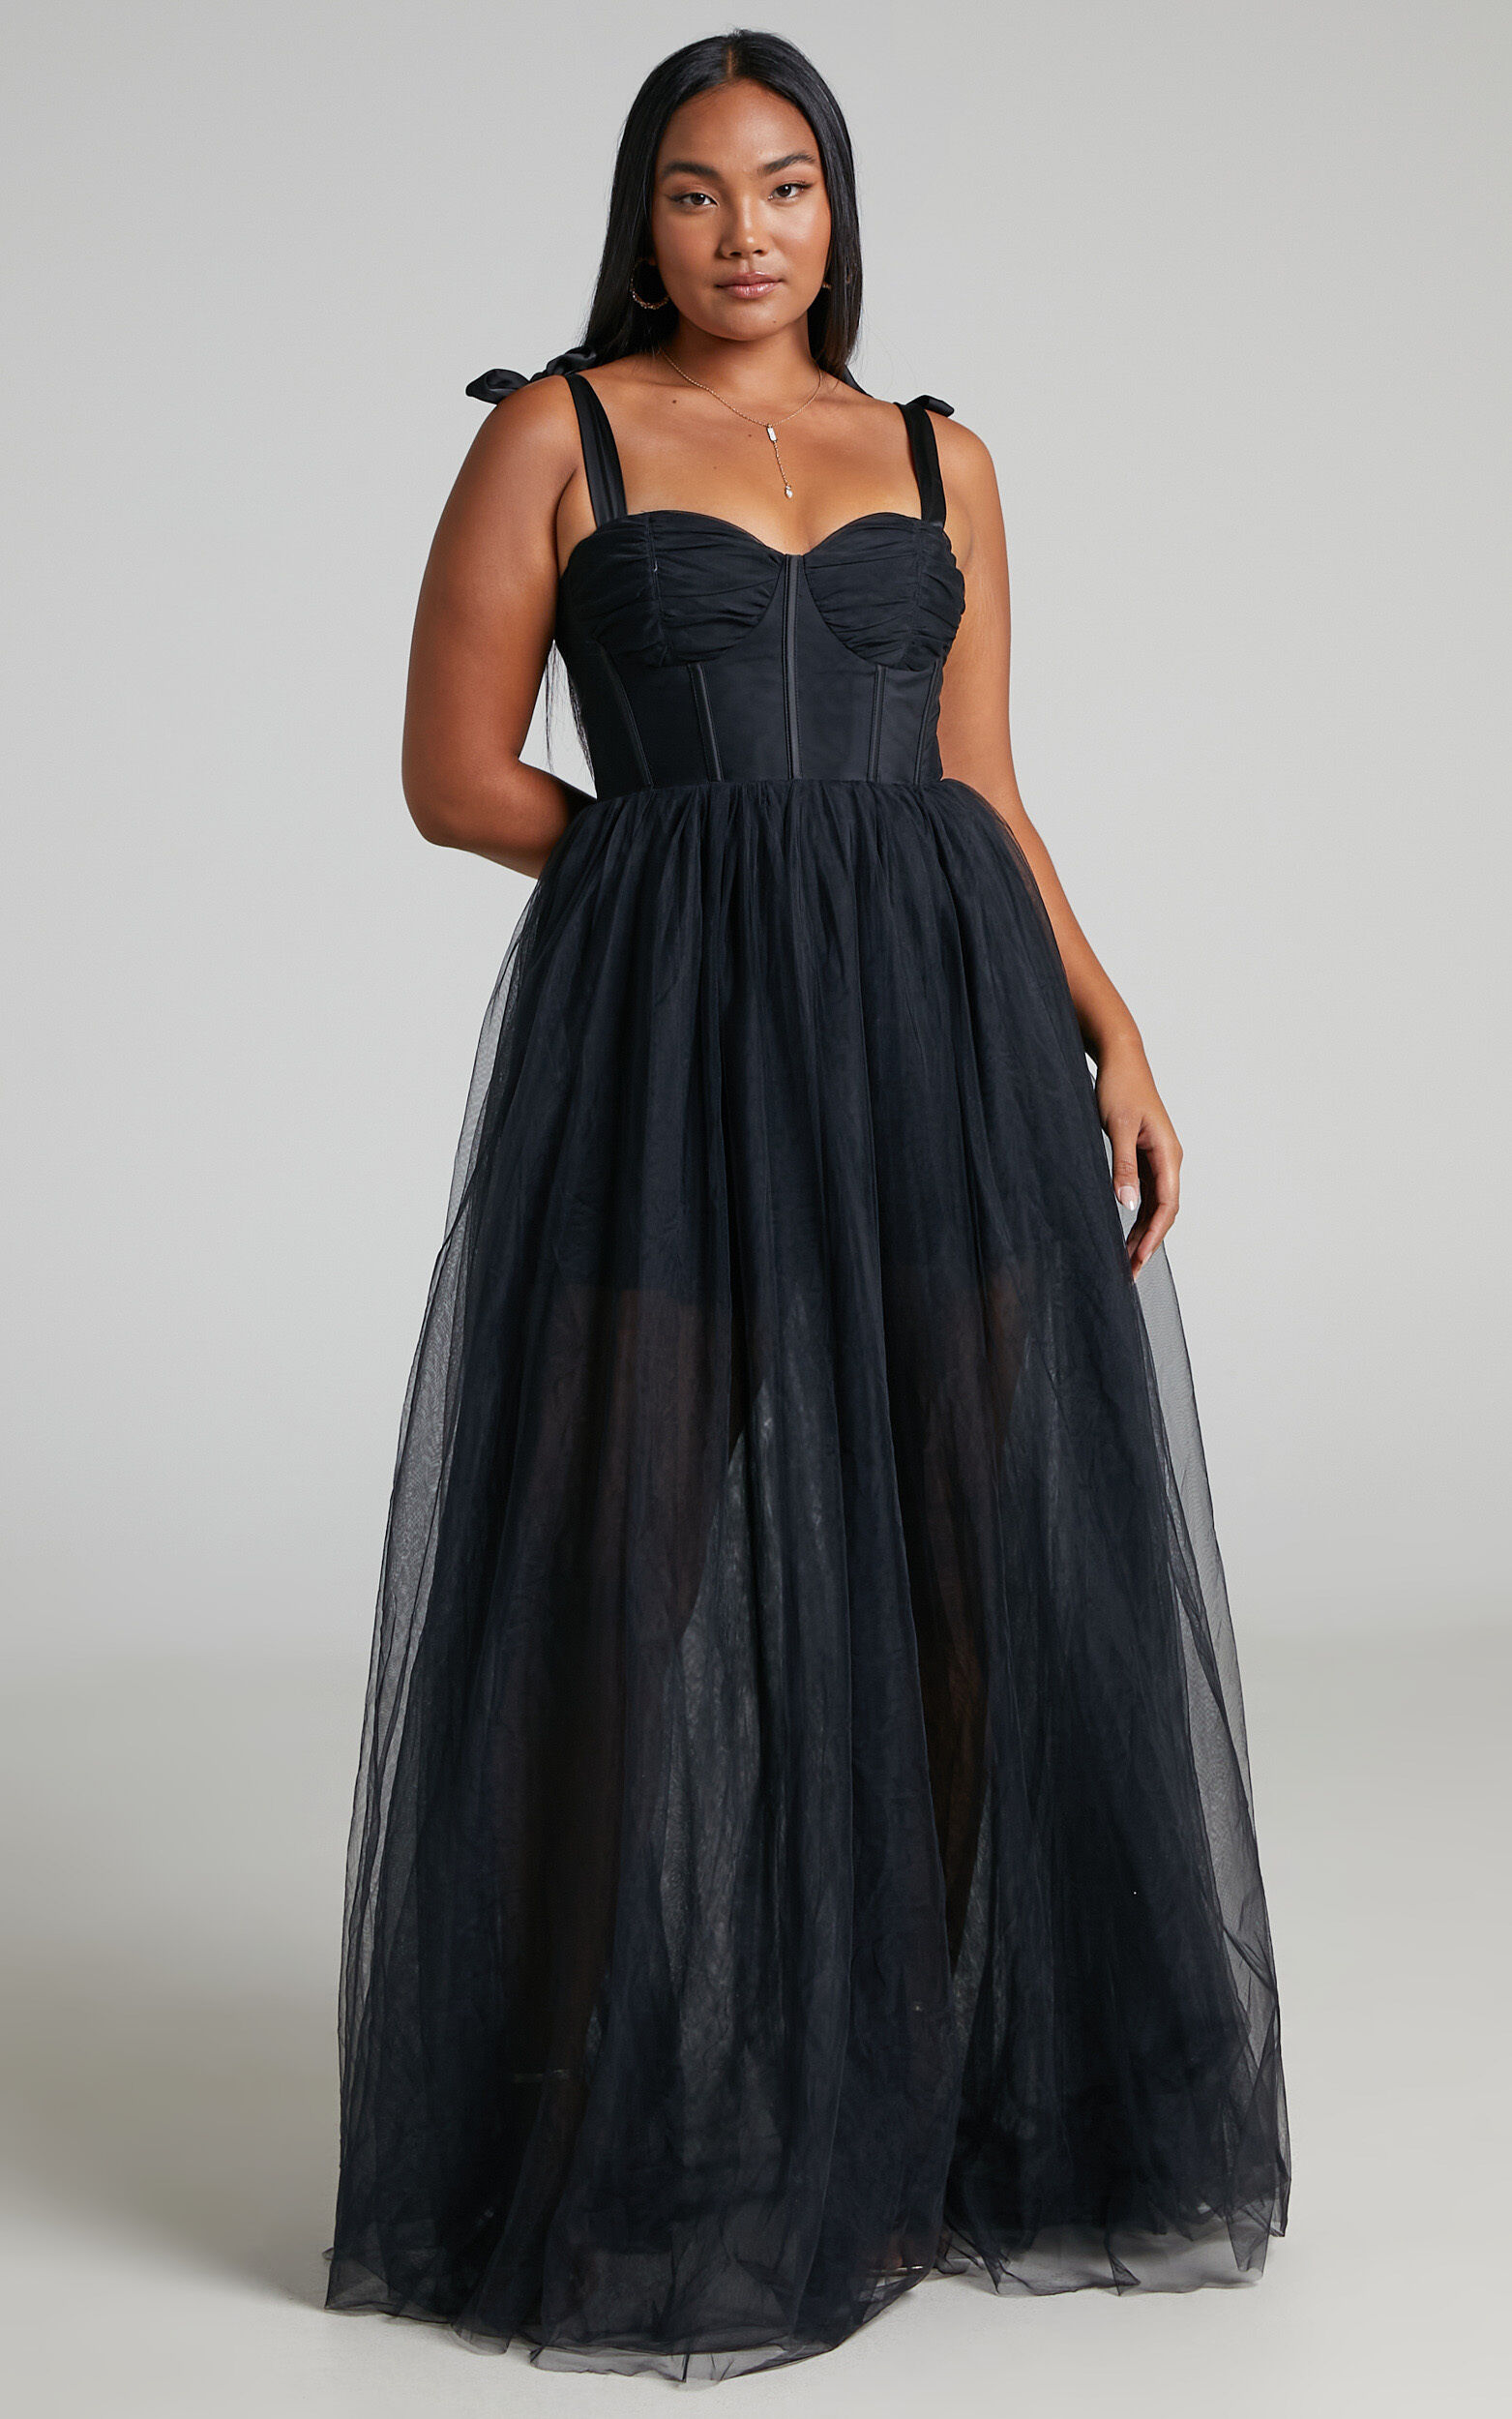 Emmary Bustier Bodice Tulle Gown in Black - 06, BLK1, super-hi-res image number null